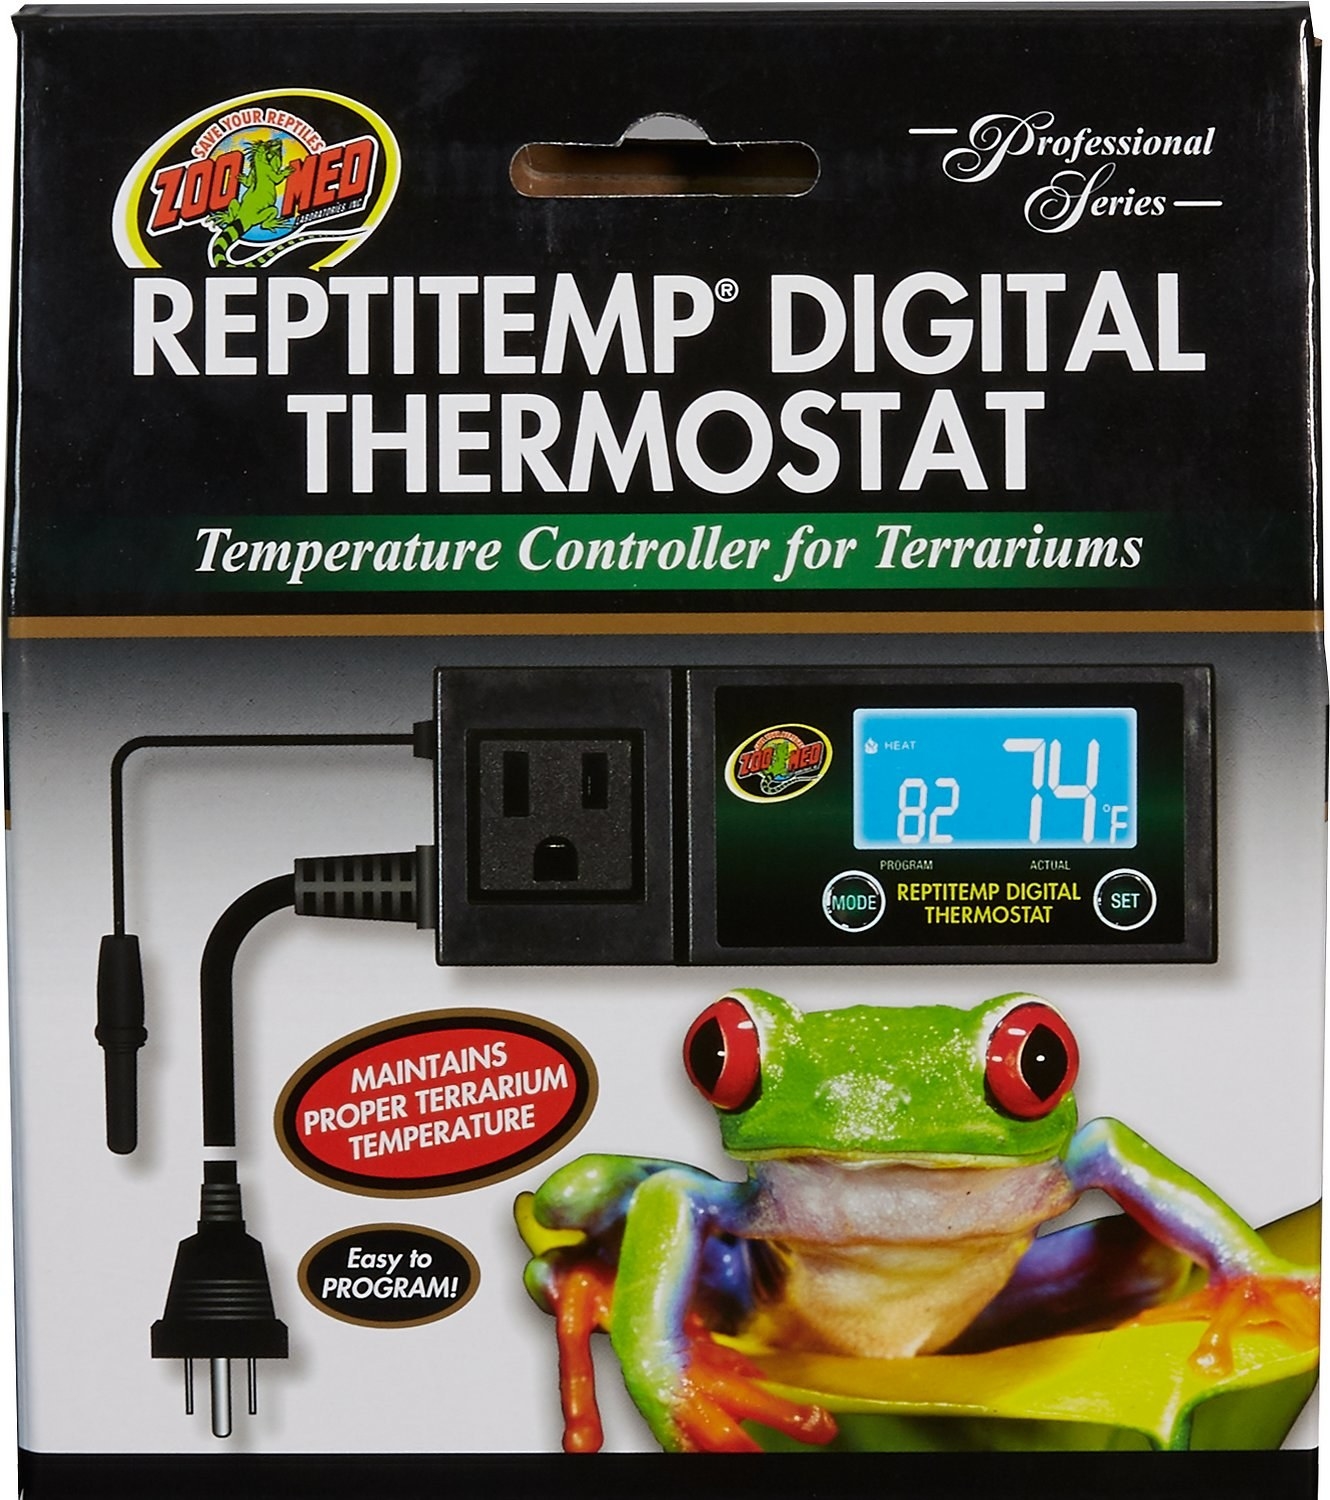 The digital thermostat